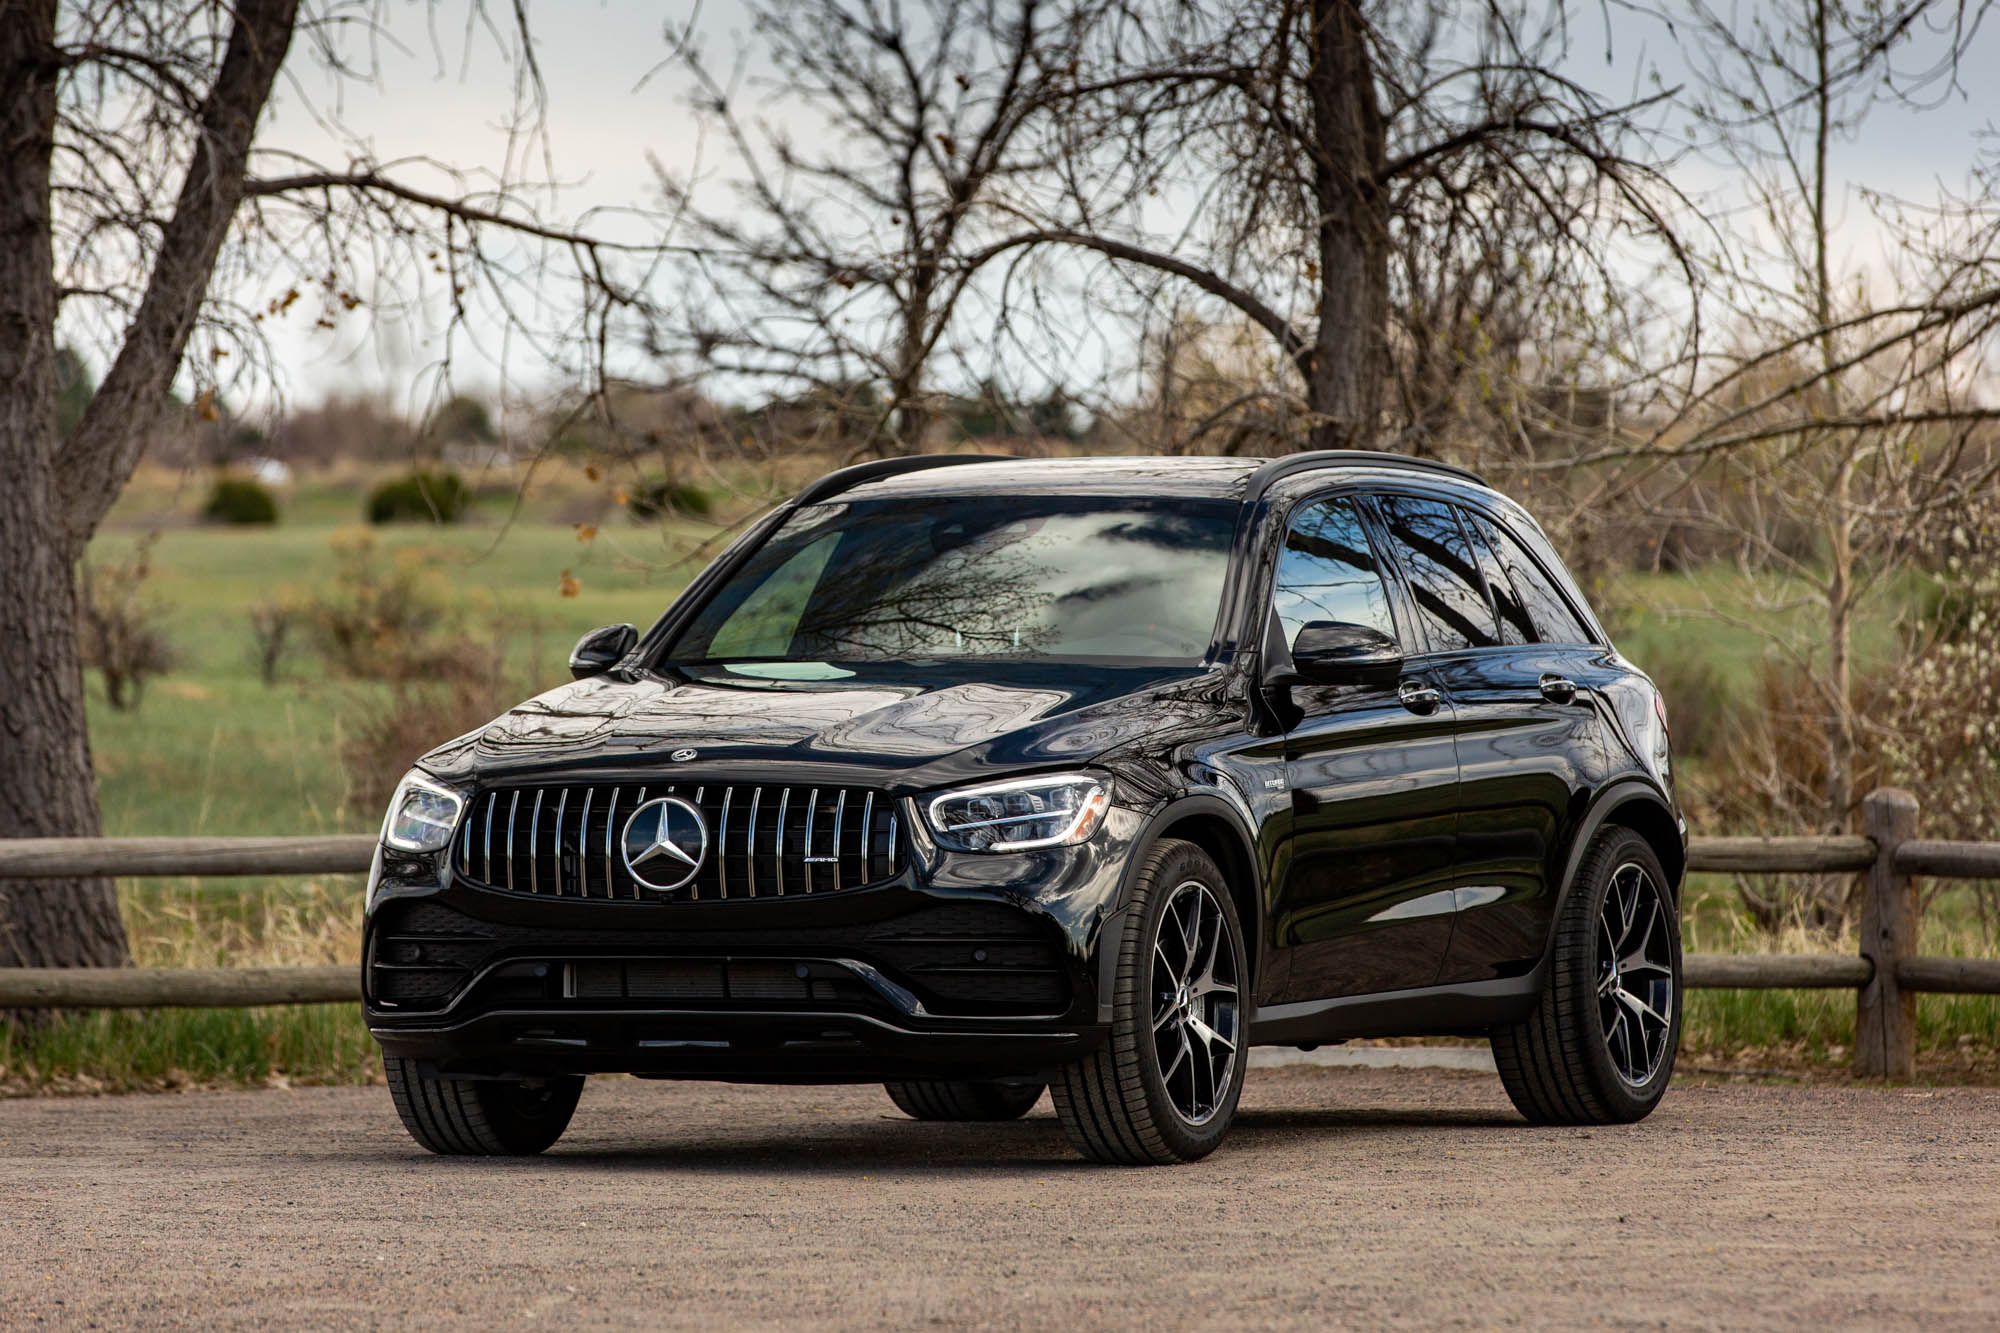 Review Update The 2020 Mercedes Benz Amg Glc 43 Suv Nose The Right Spice Level